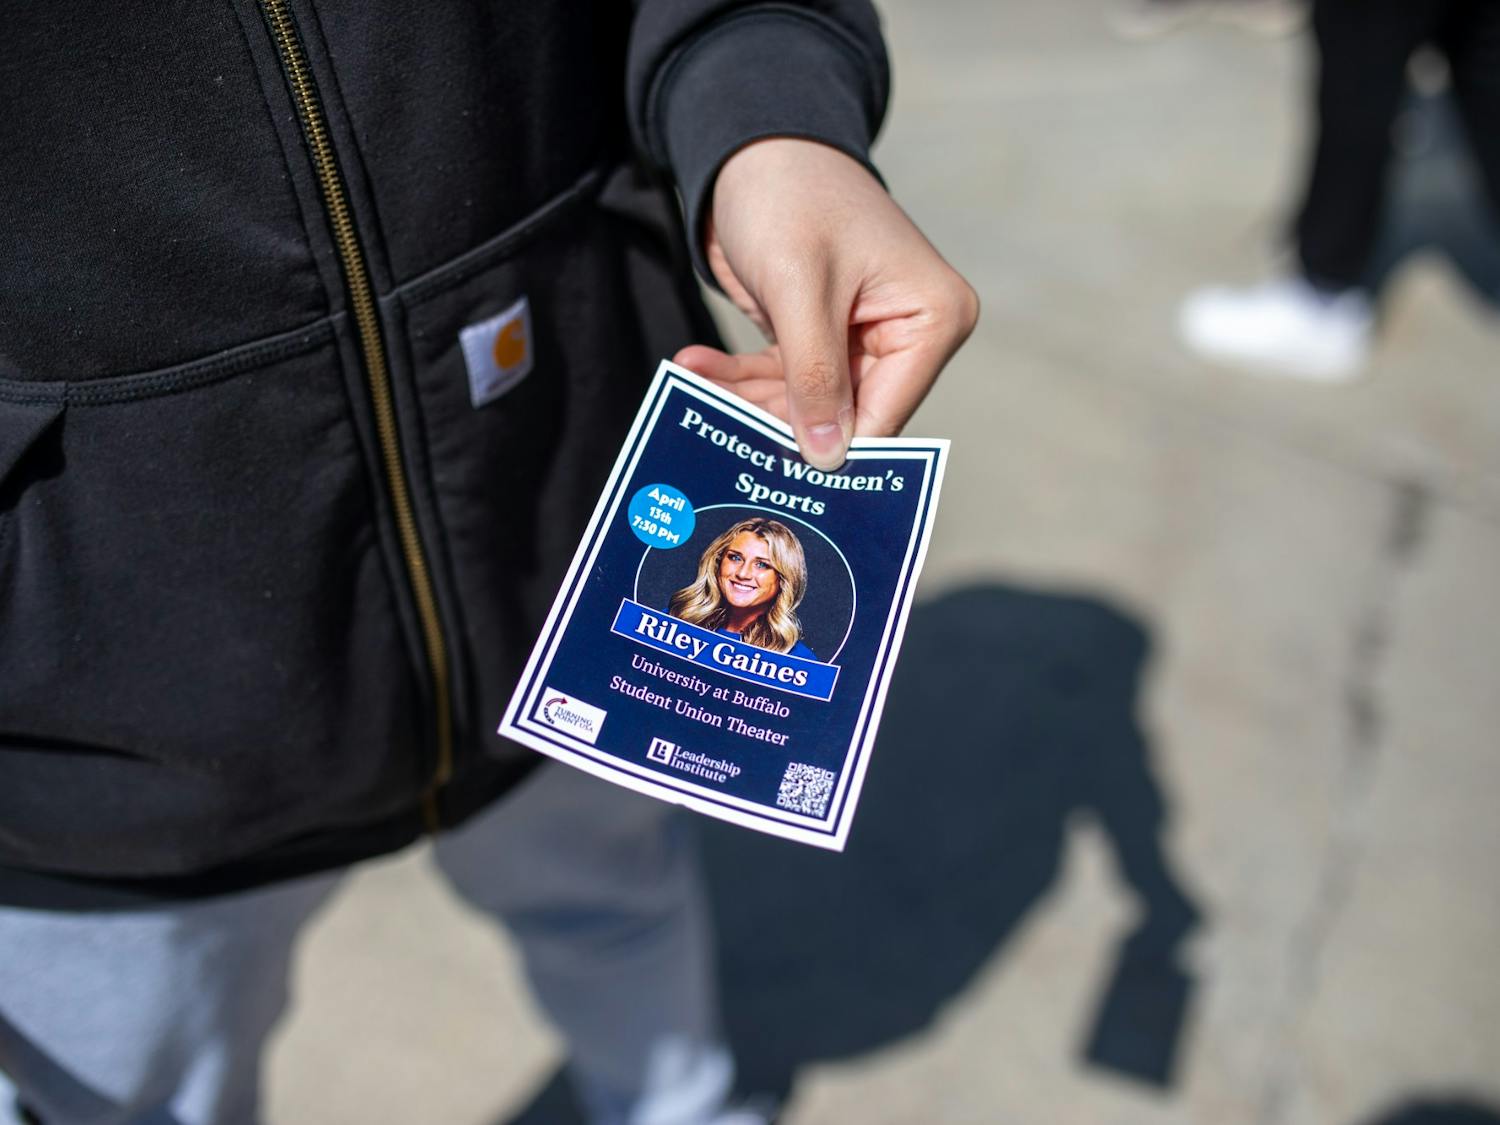 In the days before her appearance on campus, members of UB’s Turning Point USA chapter tabled outside The Commons to promote Riley Gaines’ speech.